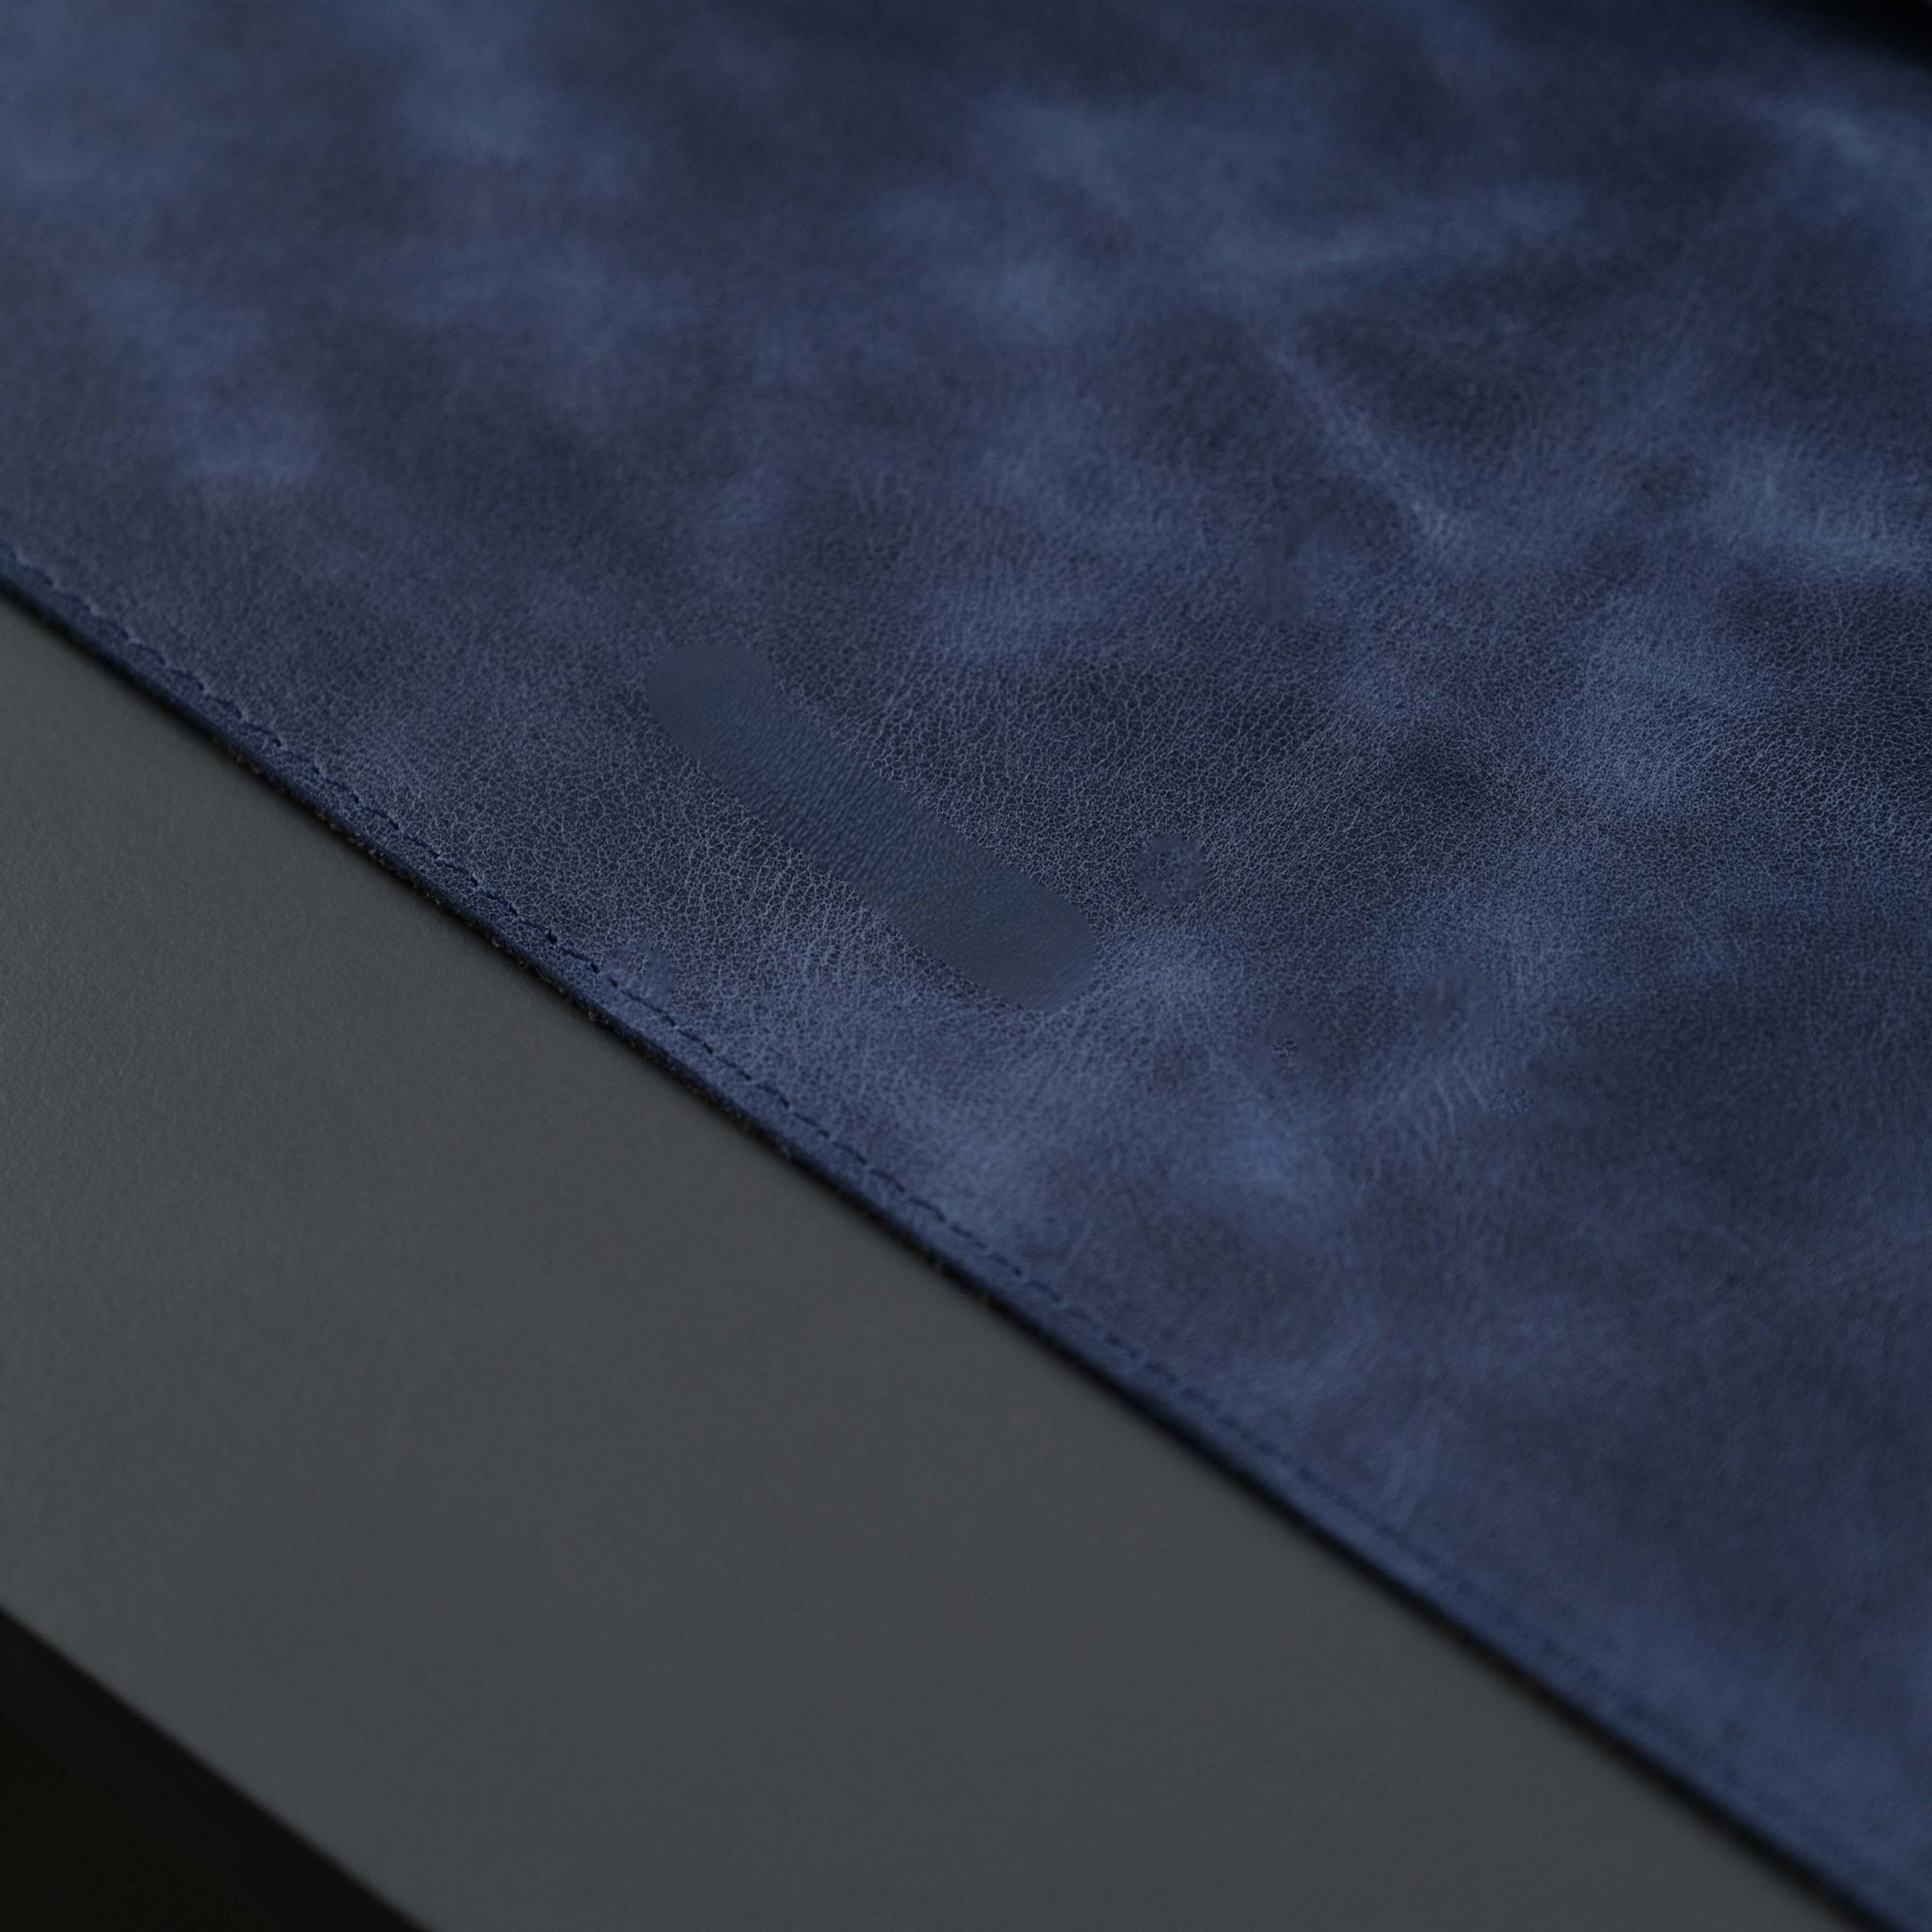 Jersey Navy Blue Leather Desk Pad for Office and Home-36x19 inch---TORONATA